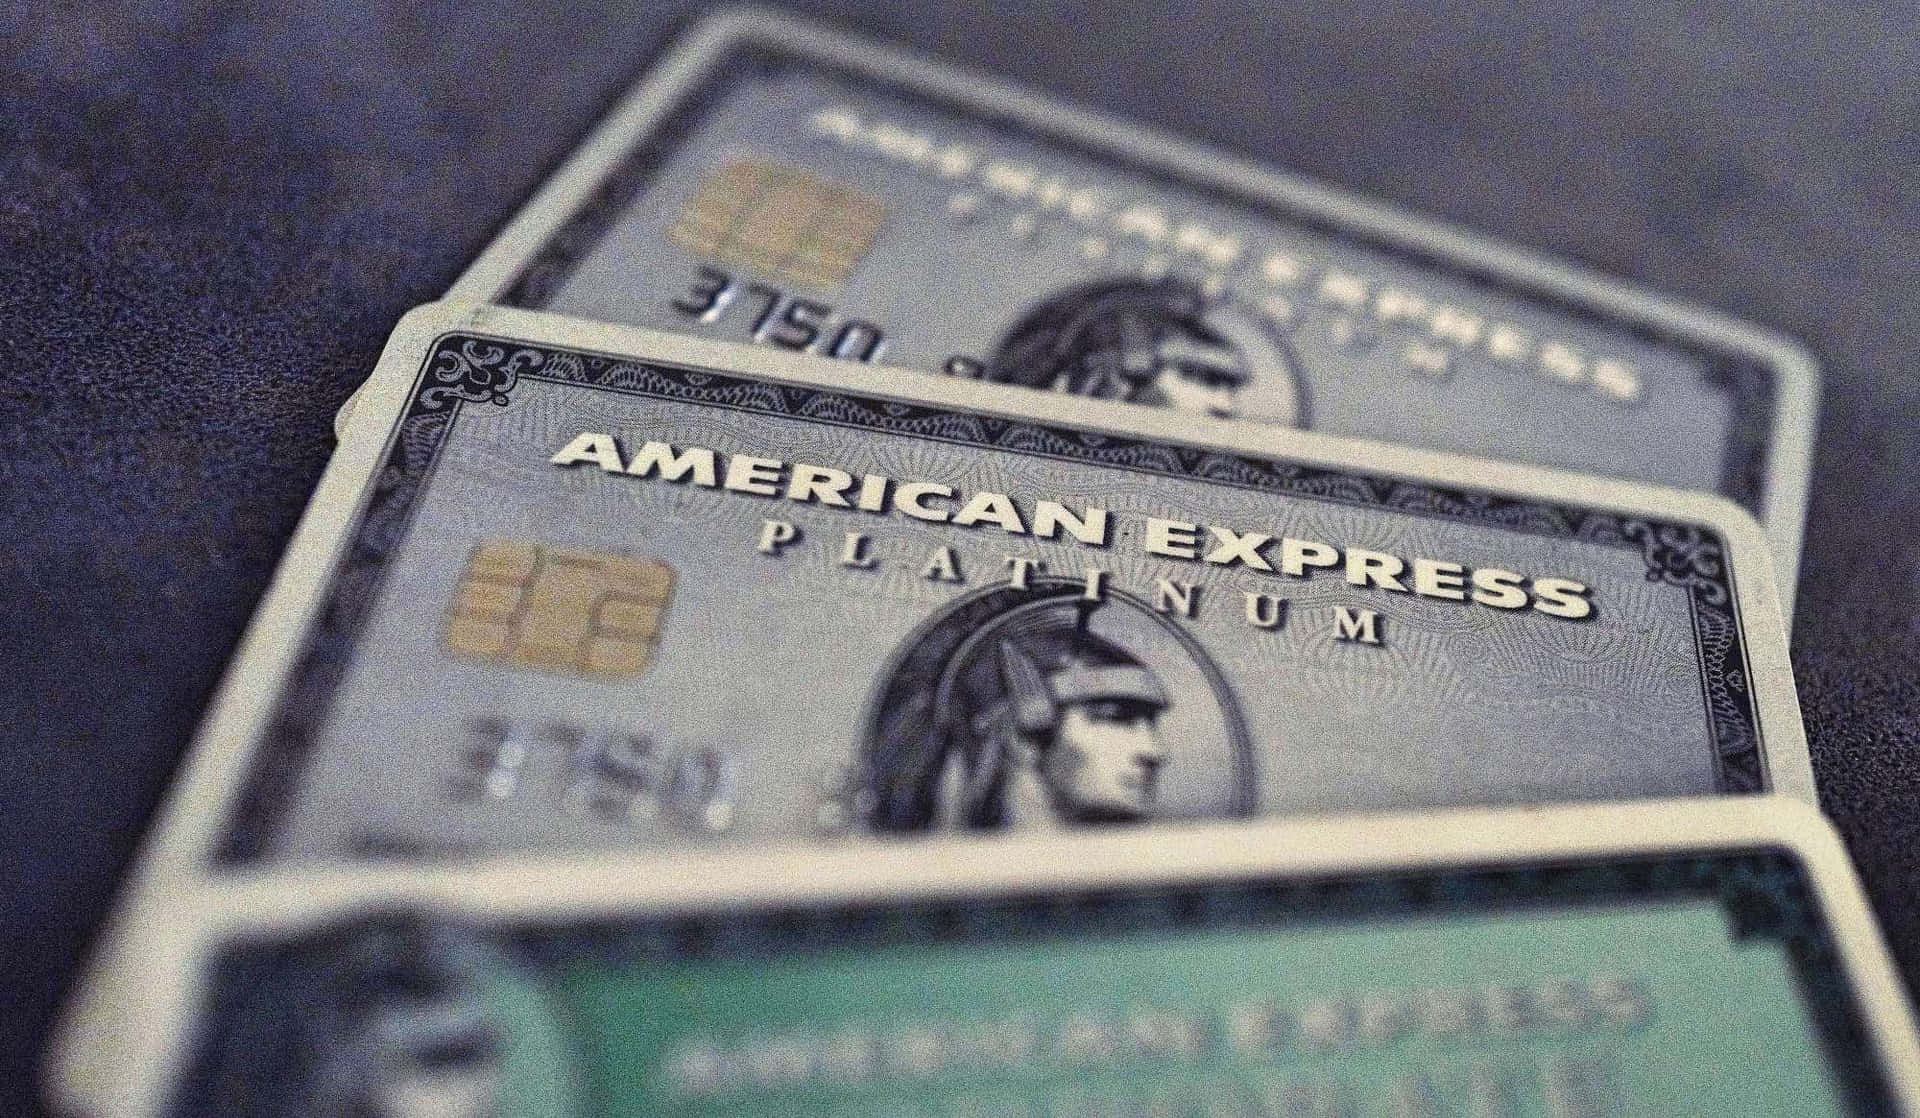 Use American Express for all of your purchase needs.